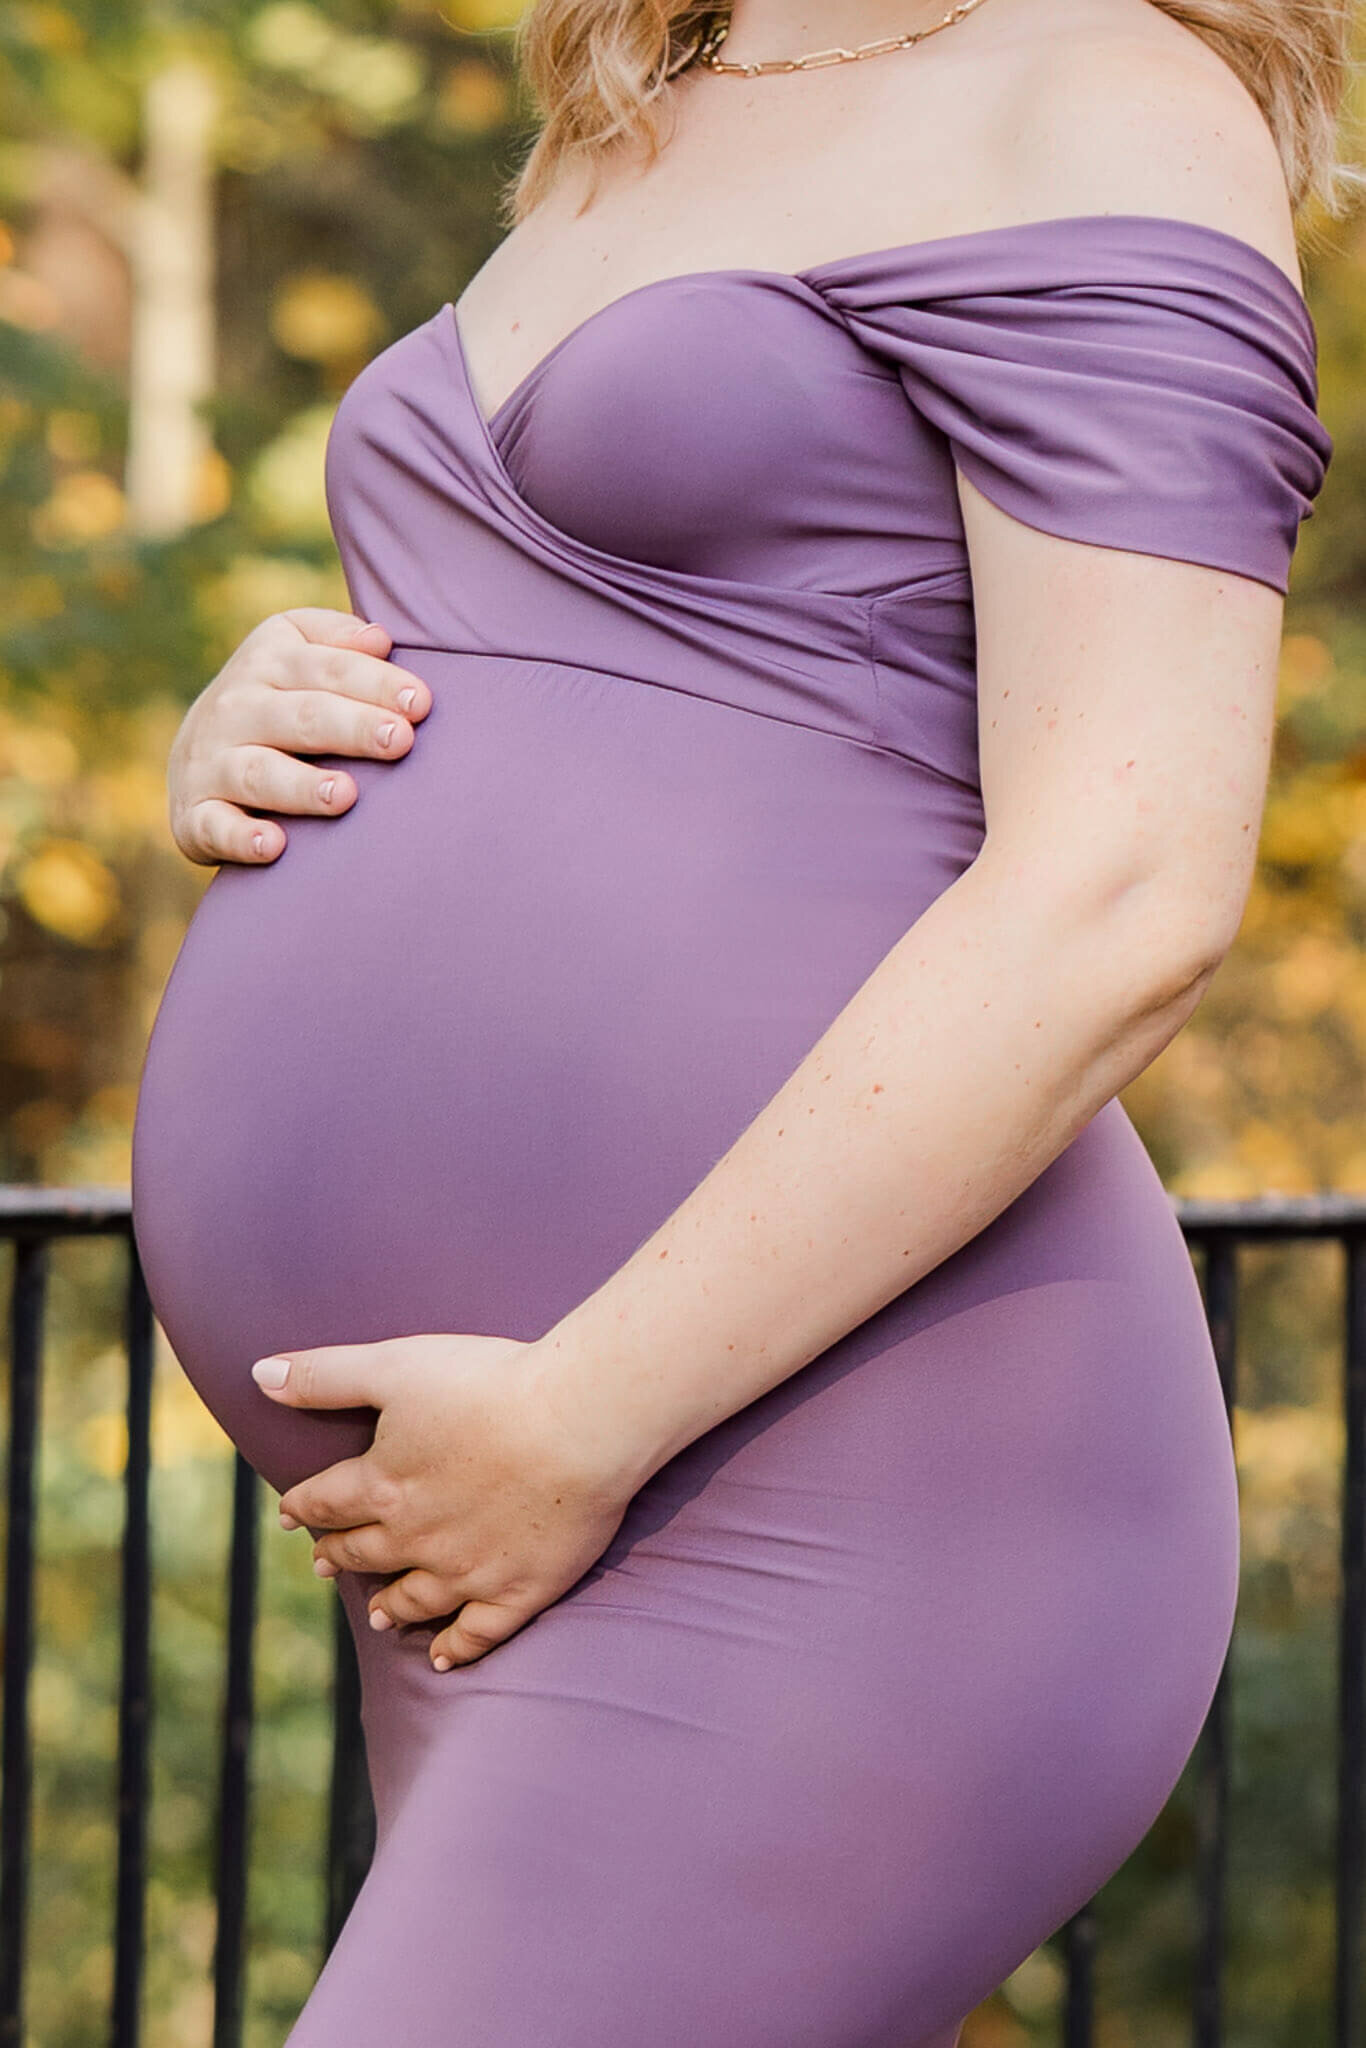 A close-up of a pregnant woman's belly during her maternity portraits at Ellanor C. Lawrence Park.